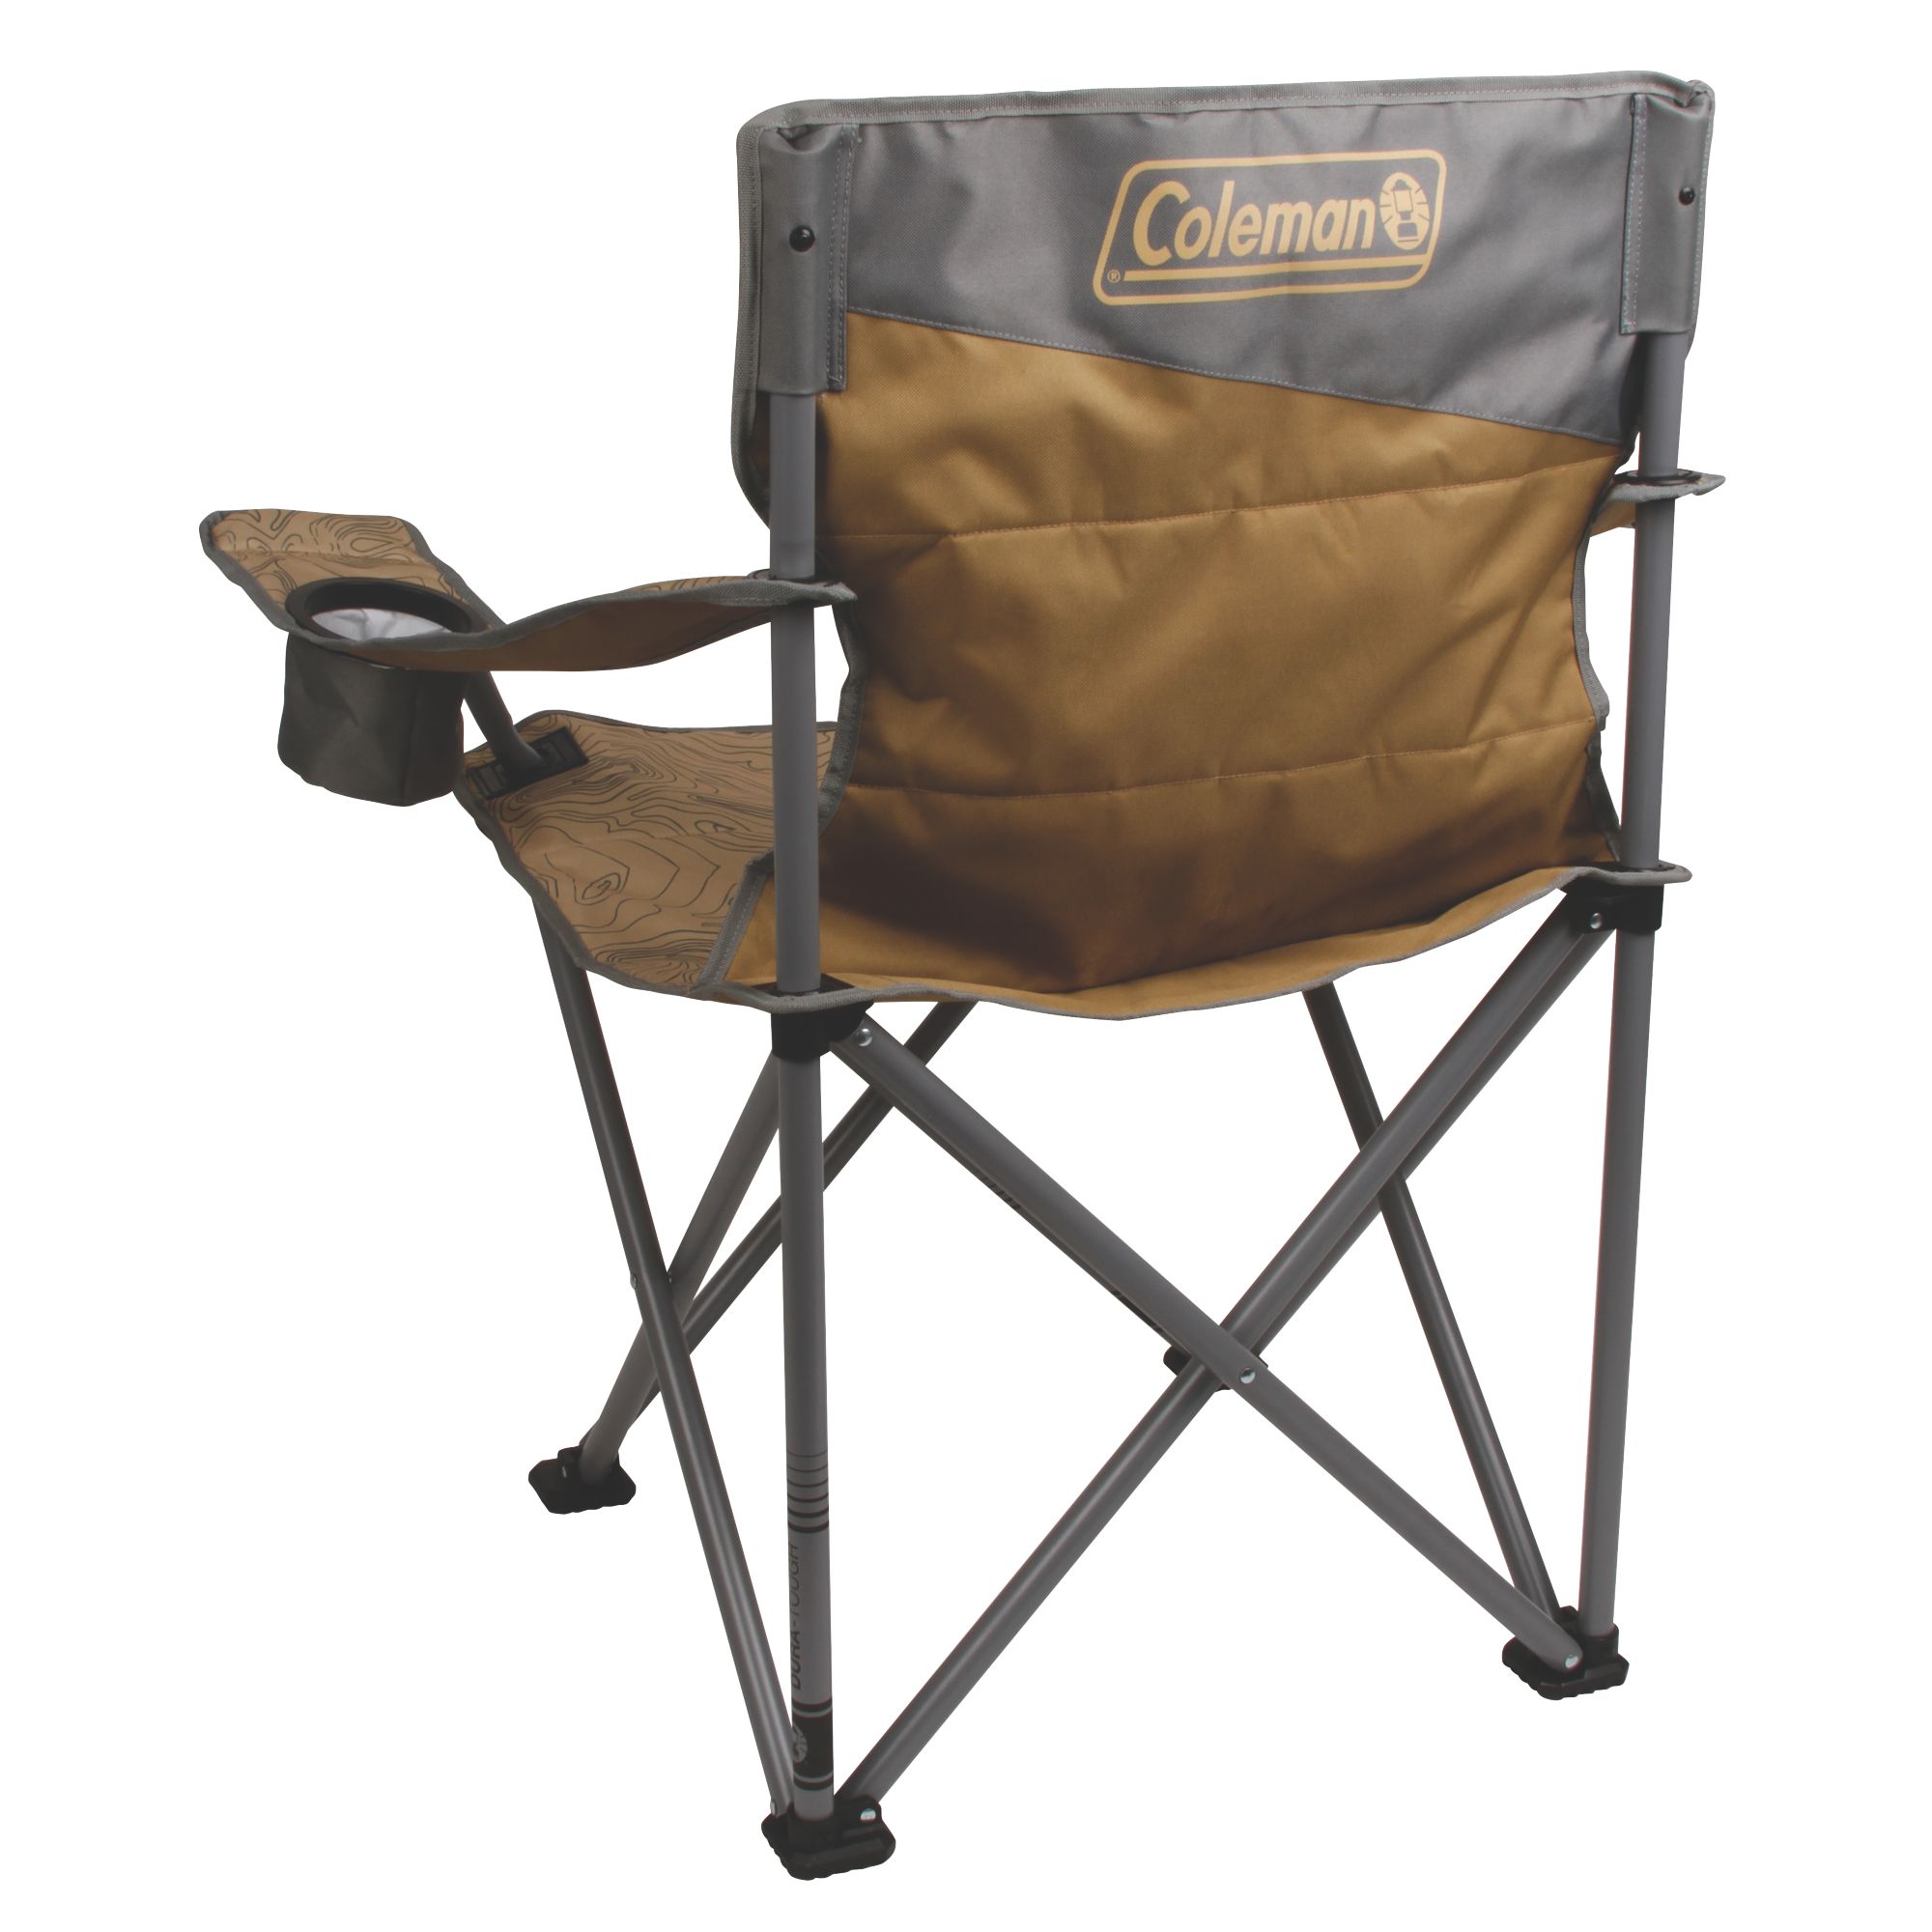 Coleman Big-N-Tall™ Quad Chair - image 2 of 7